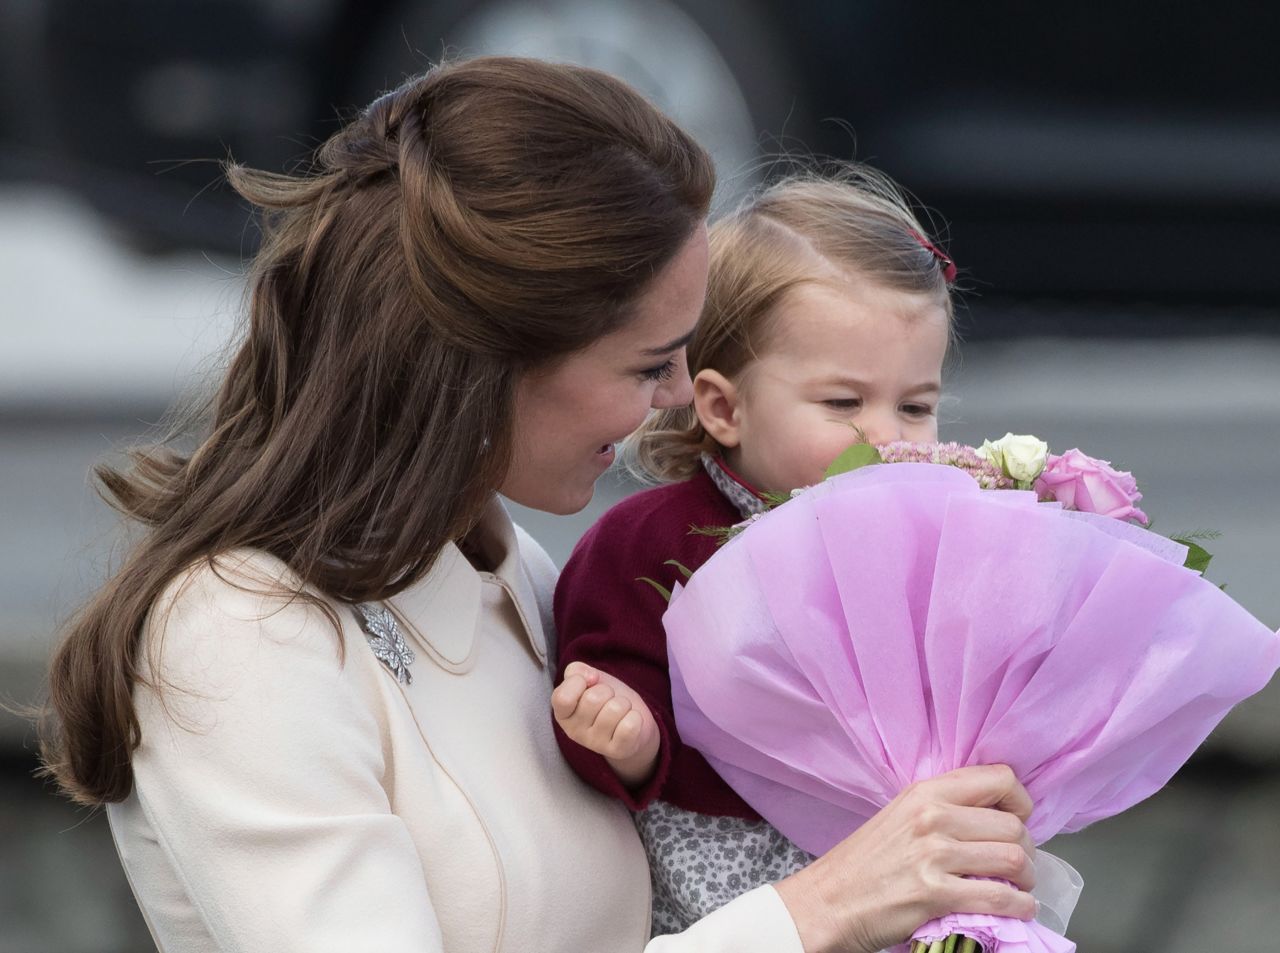 Catherine holds flowers for Charlotte to smell as they leave Victoria, British Columbia, in October 2016.